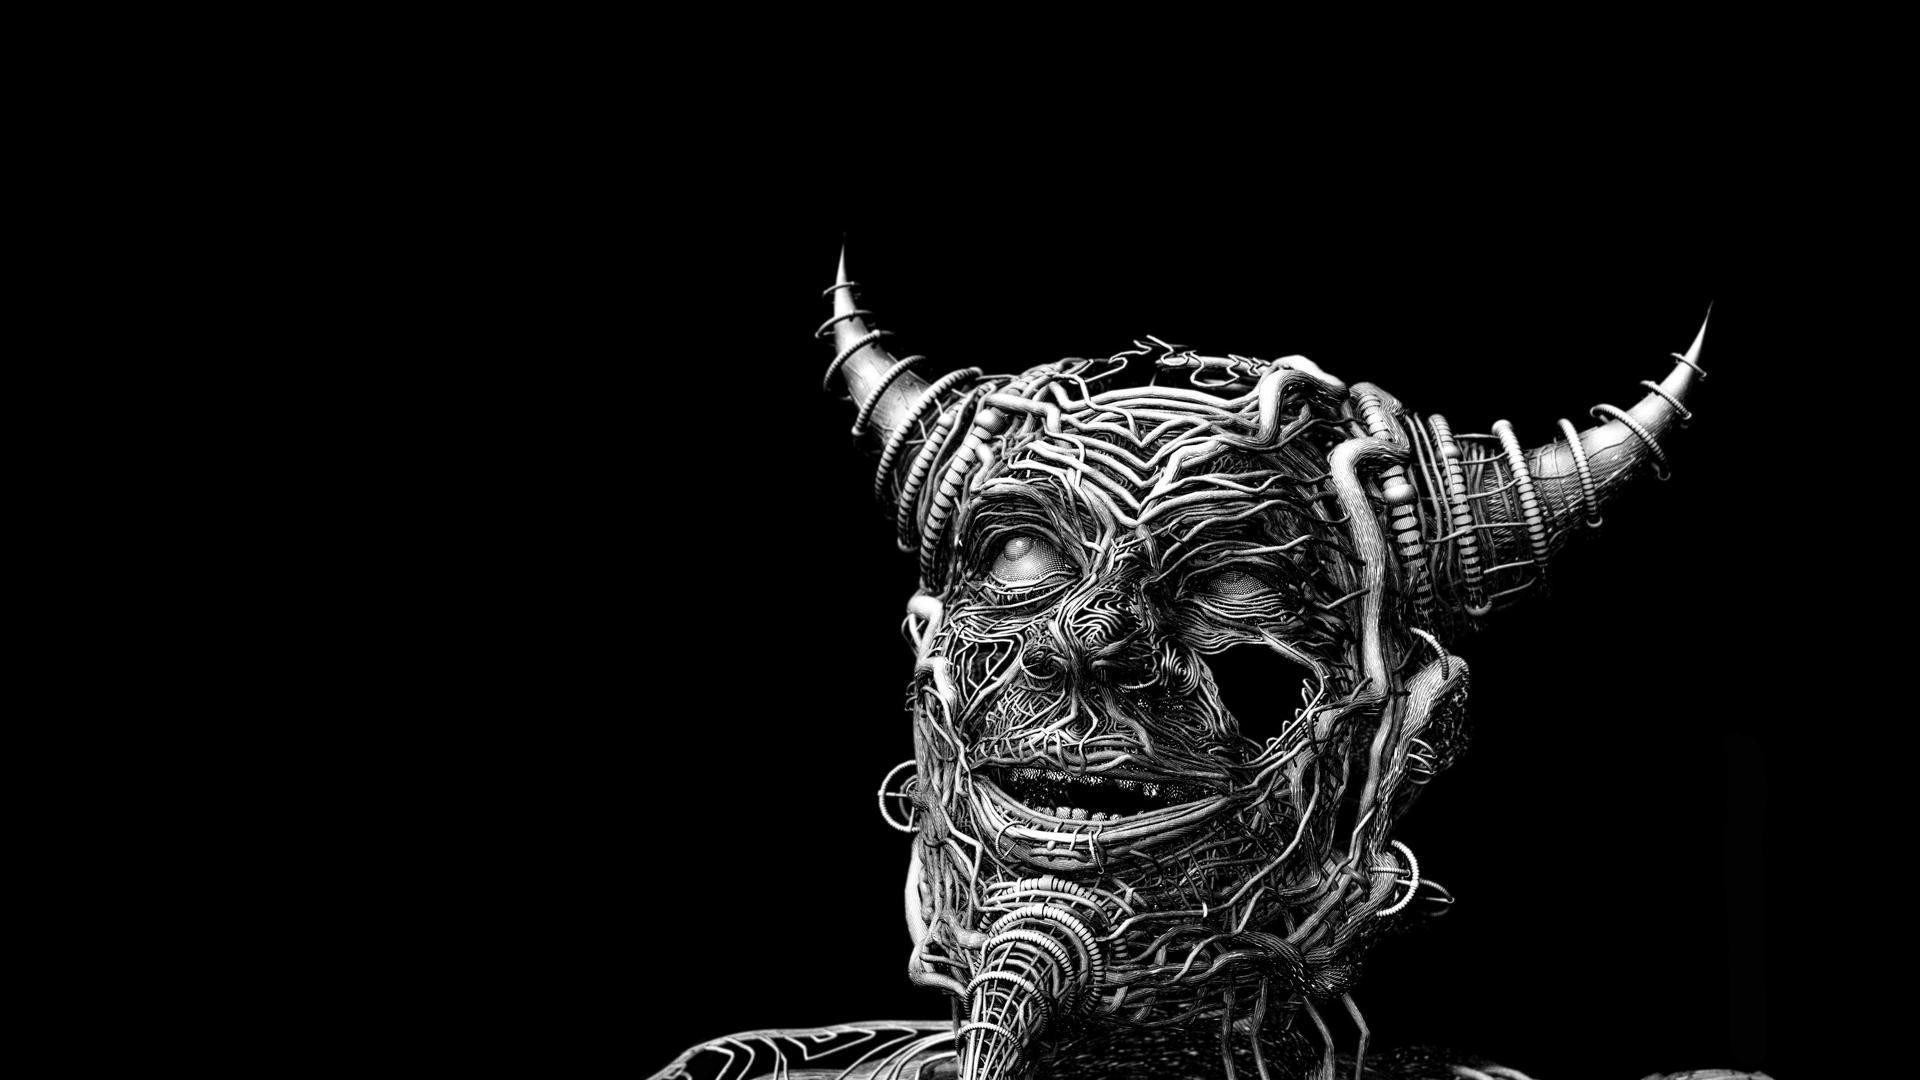 minimalism, Black Background, Digital Art, Monochrome, Creature, Face, Horns, Smiling, Wires, Looking Up Wallpaper